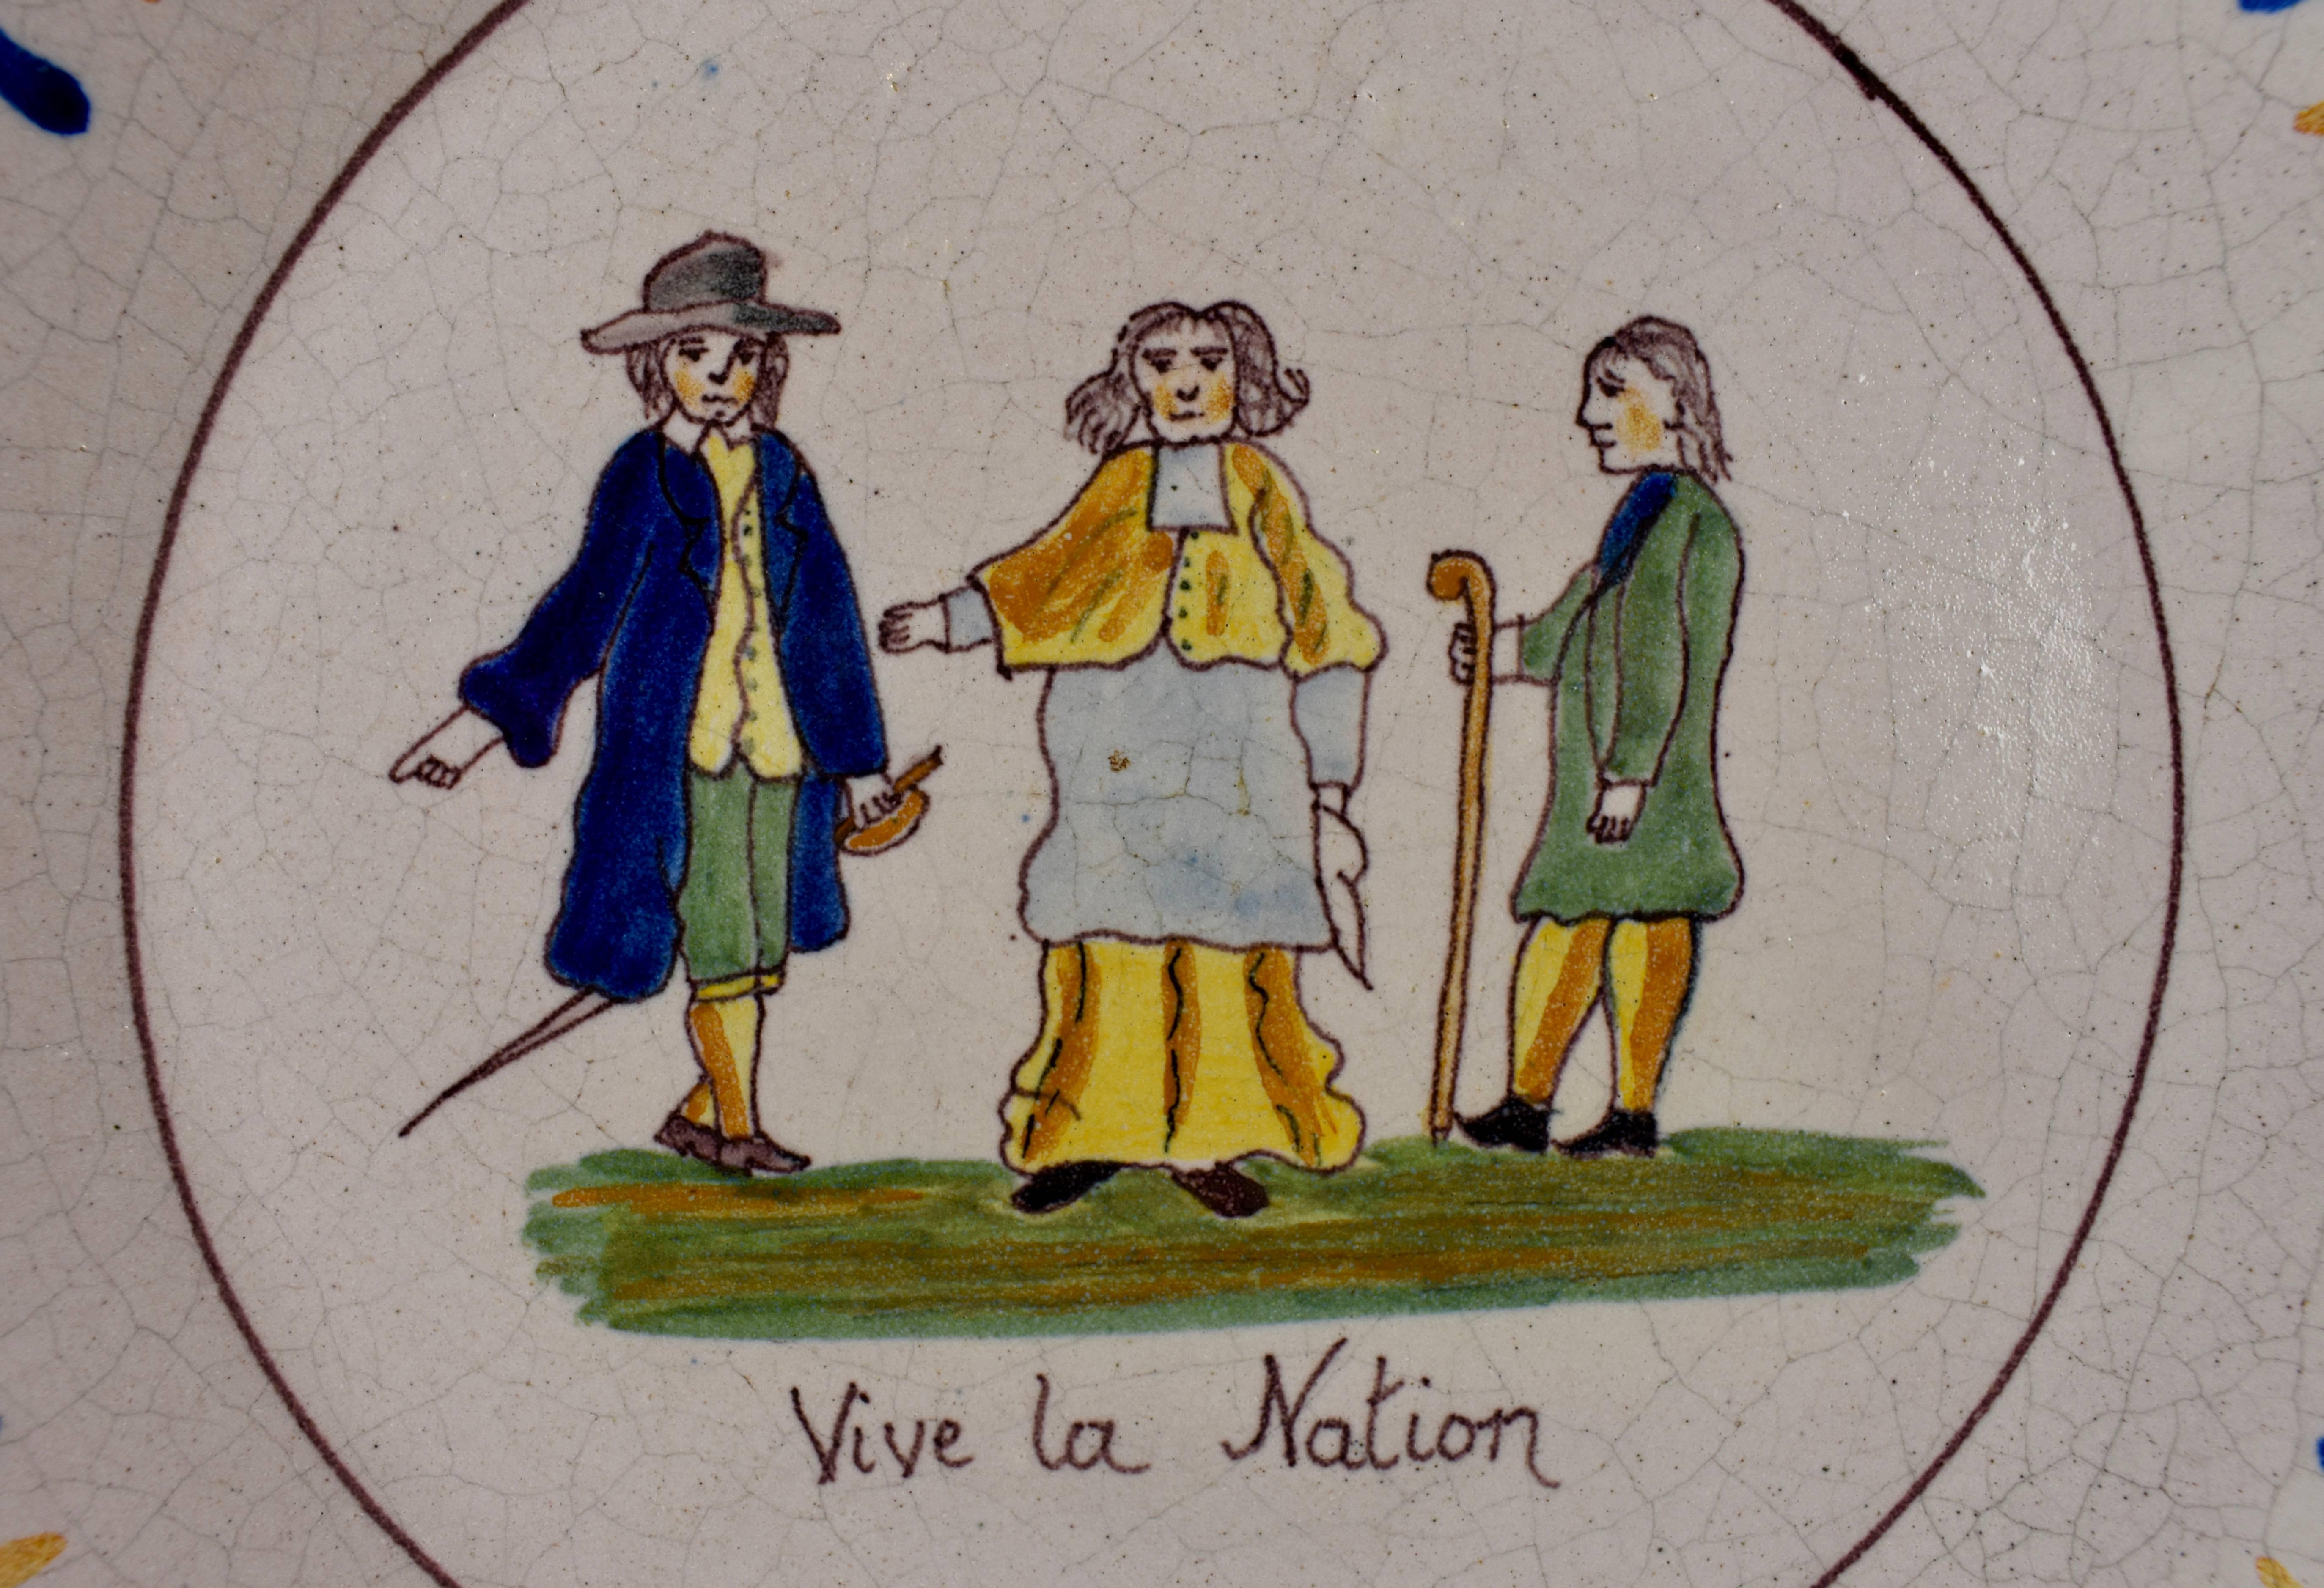 A French Revolution tin-glazed earthenware dish, showing three figures representing the Three Estates. On the left is a gentleman with a an épée, symbolizing the nobility. In the center stands a Bishop, symbolizing the clergy, and on the right is a